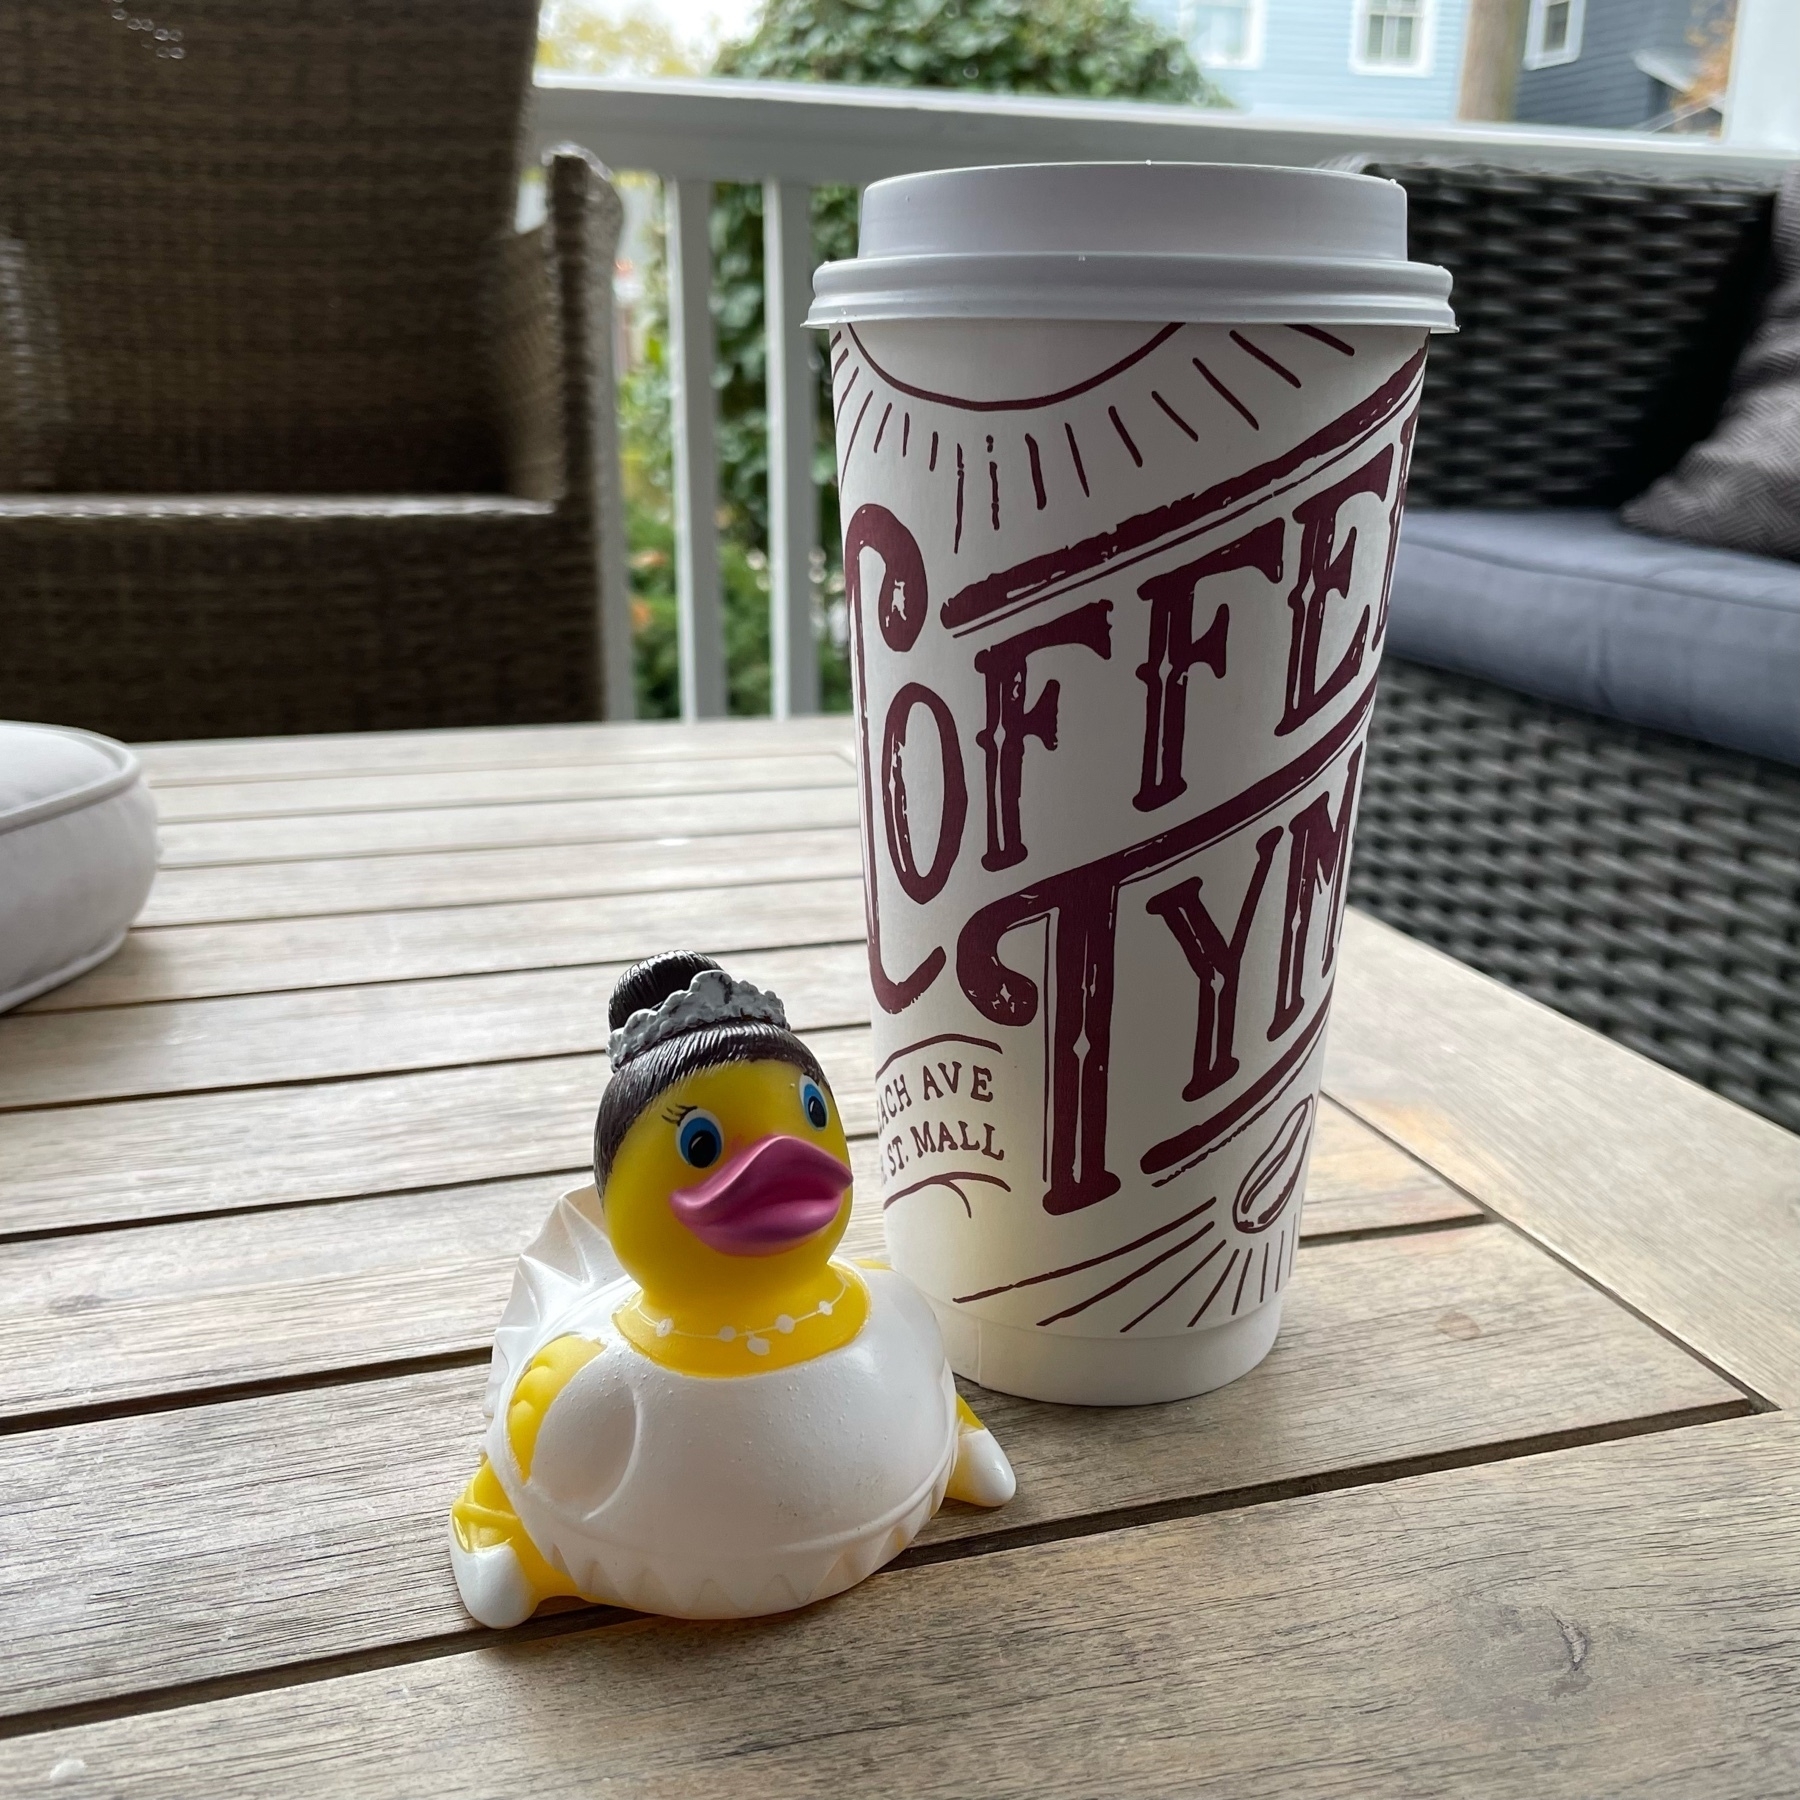 Coffee and rubber ducky